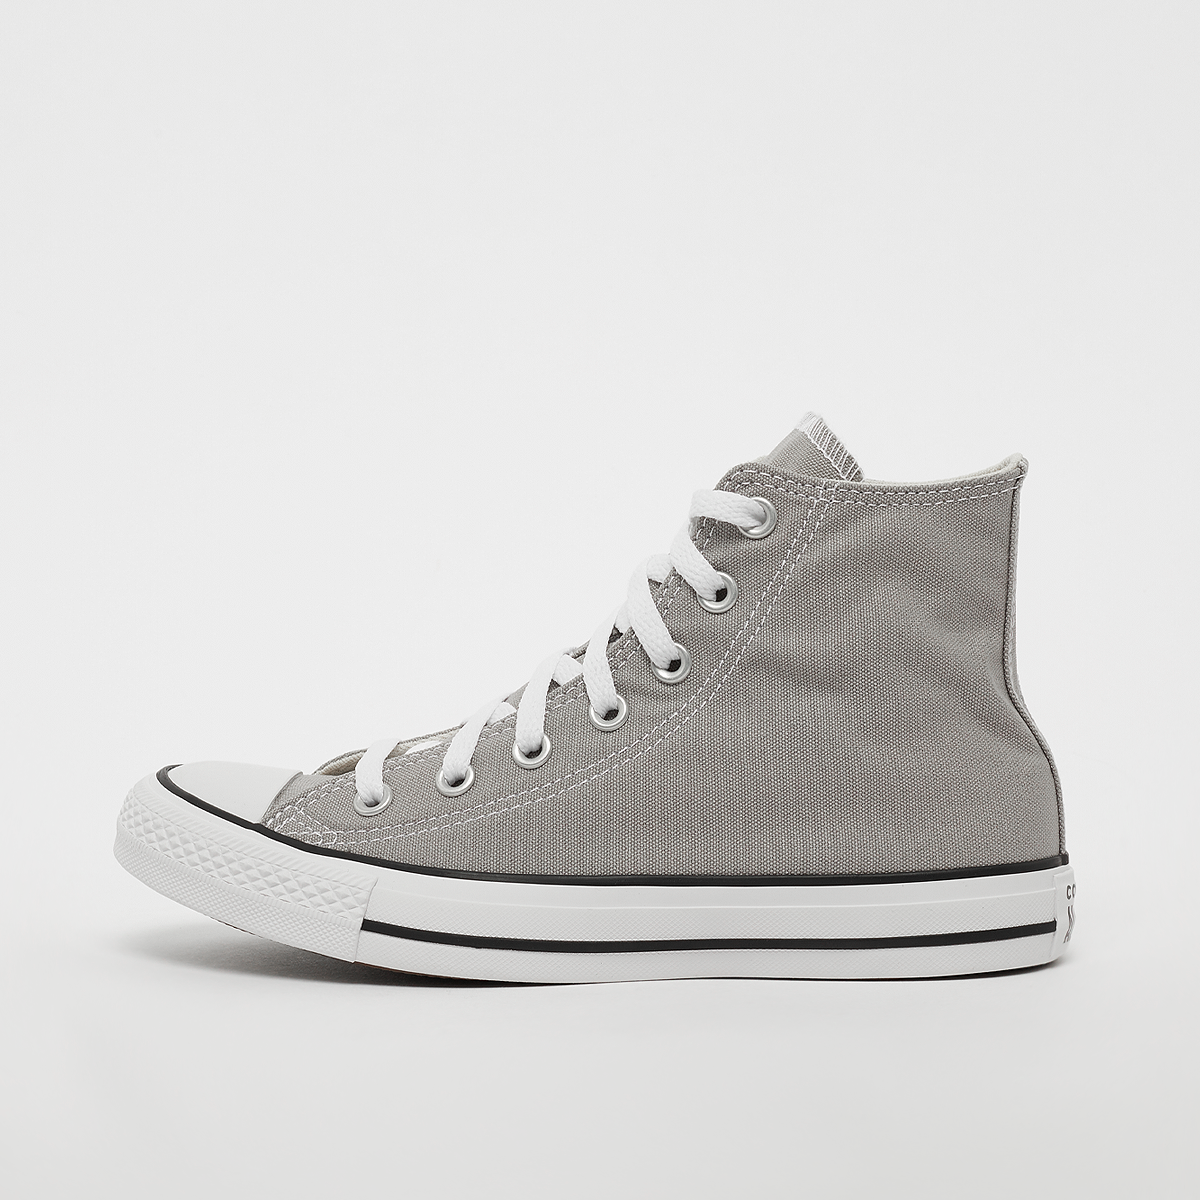 Chuck Taylor All Star totally neutral, Converse, Footwear, totally neutral, taille: 36.5